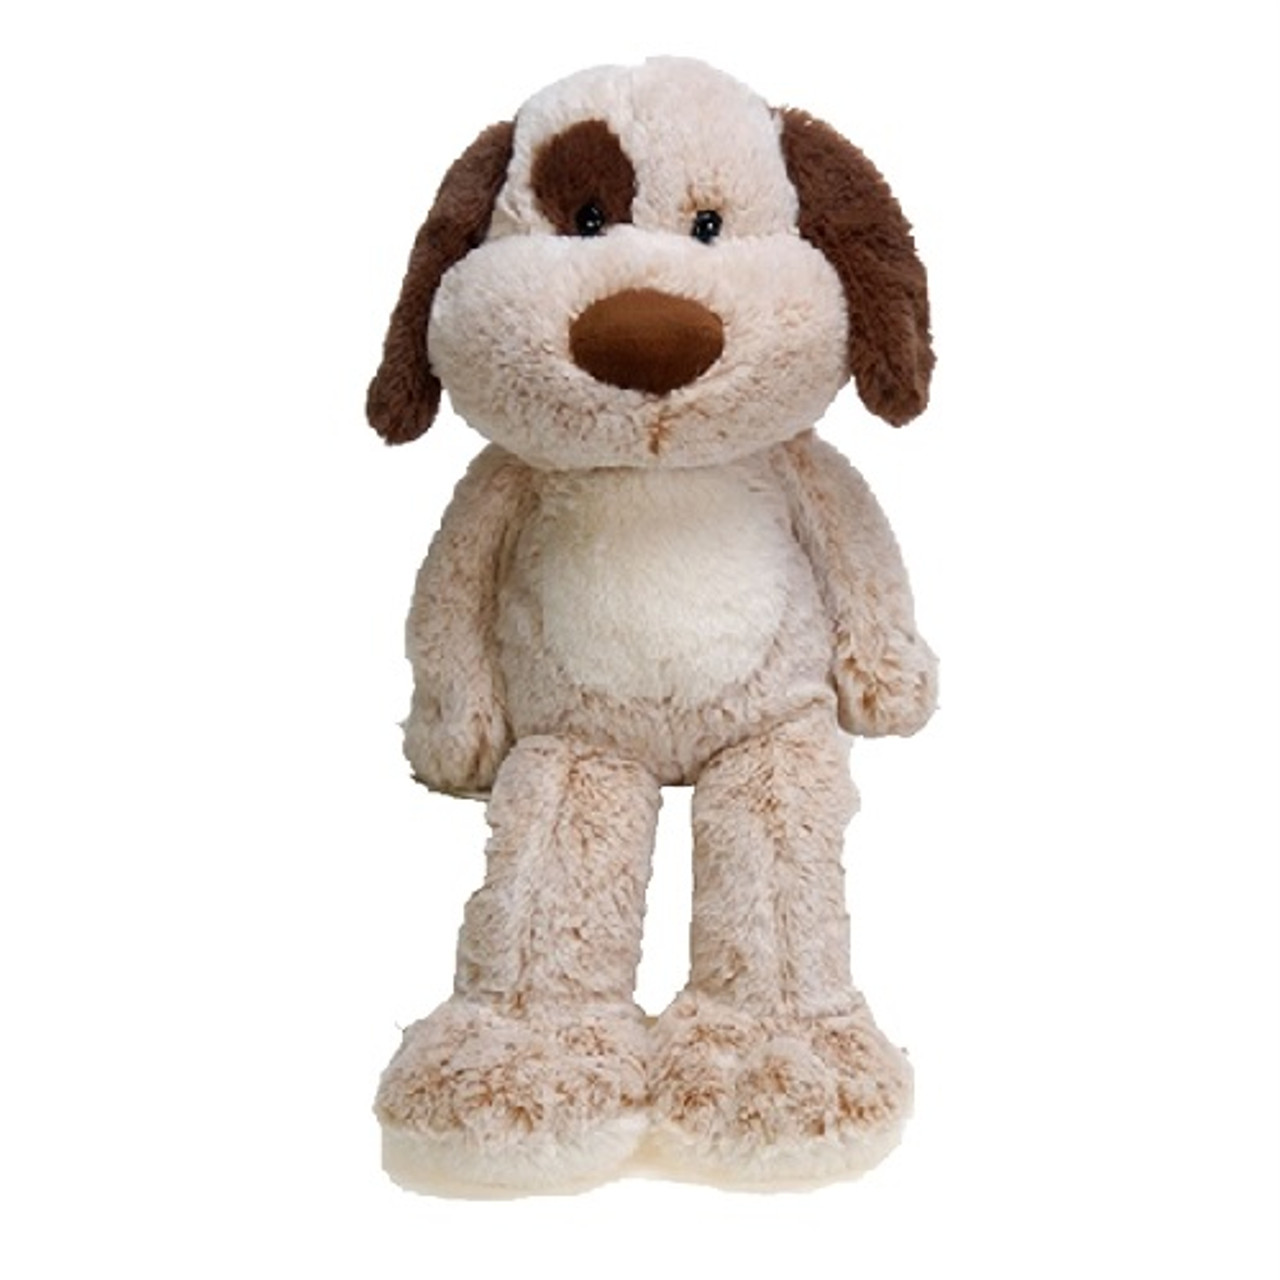 Weighted Stuffed Animals for Kids with 